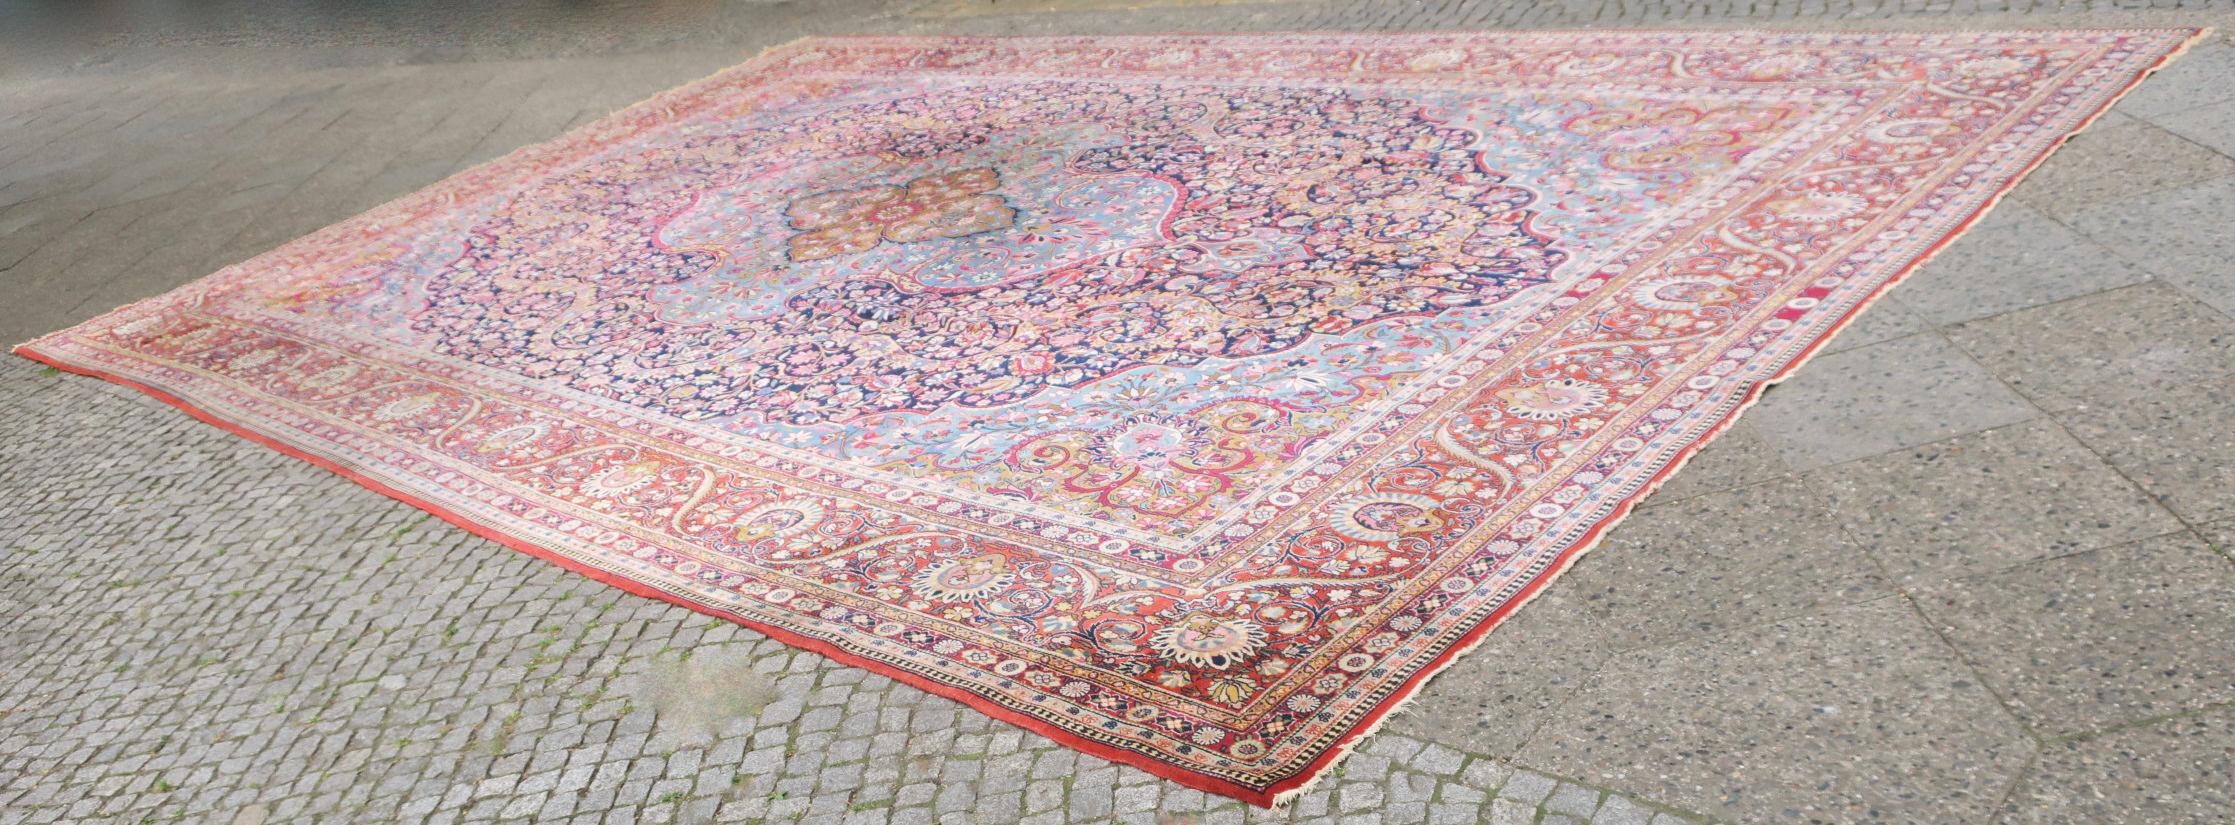 Large and impressive fine Isfahan carpet dating from circa 1930.
Good vintage condition with some low areas, please see close-up pictures.